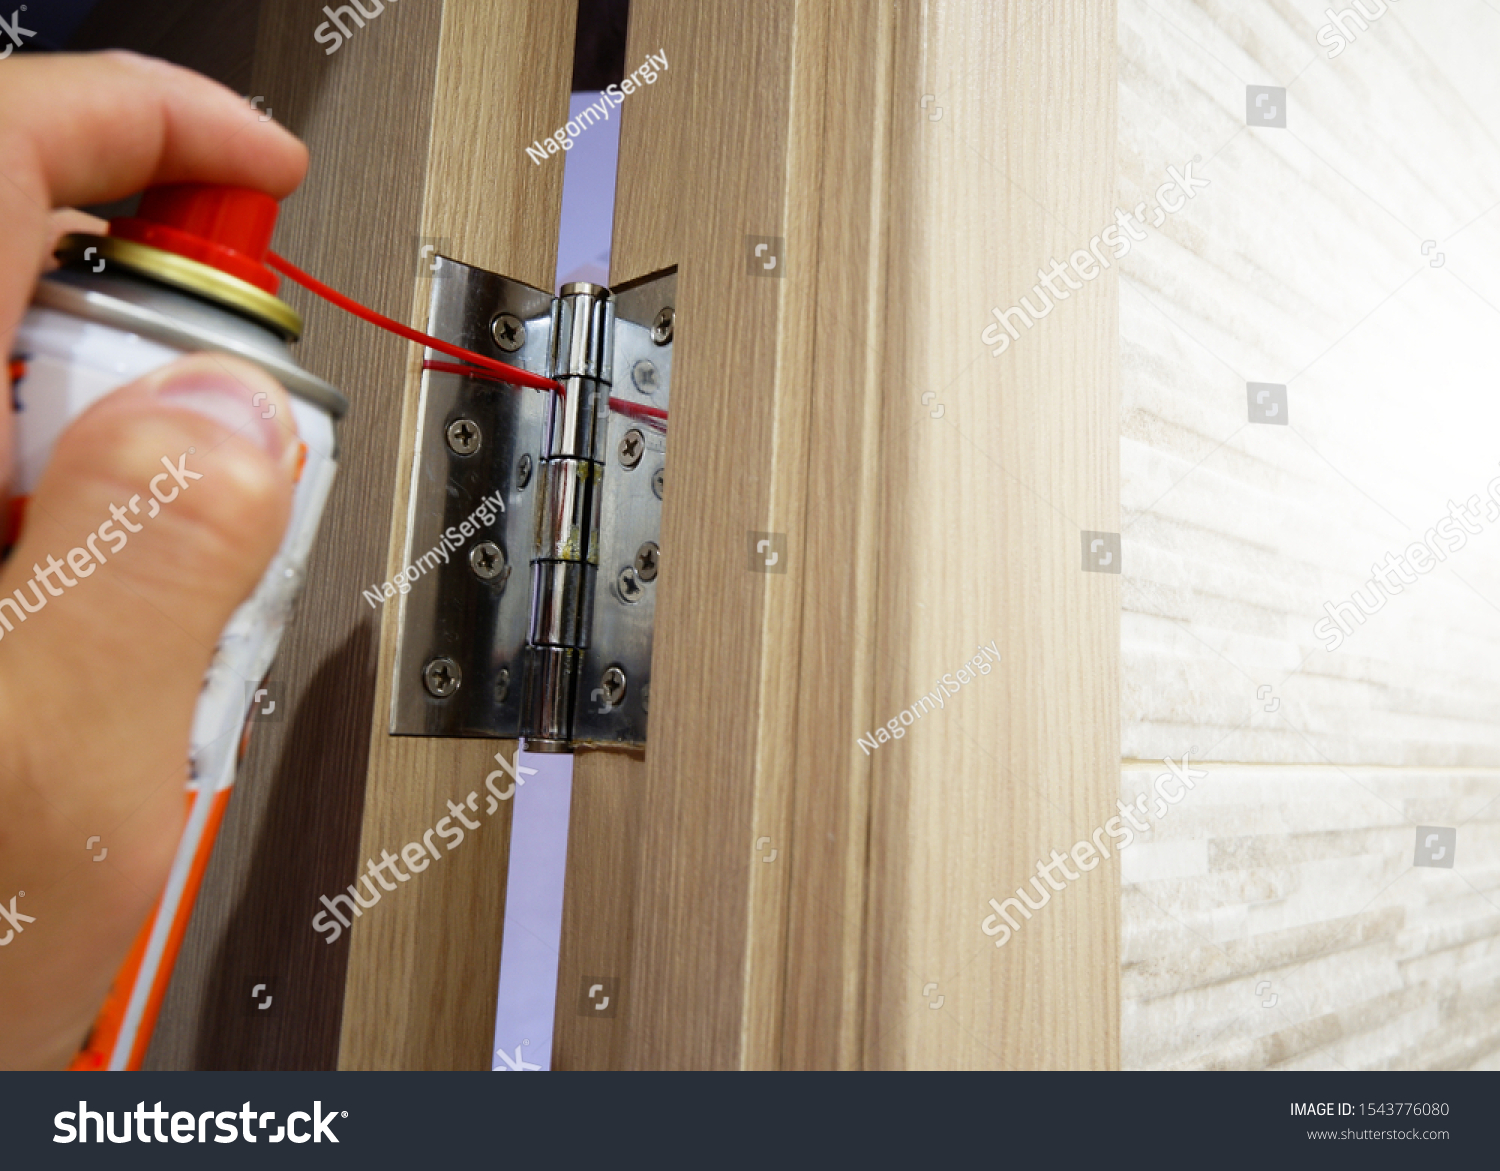 A man lubricates door hinges with oil. #1543776080